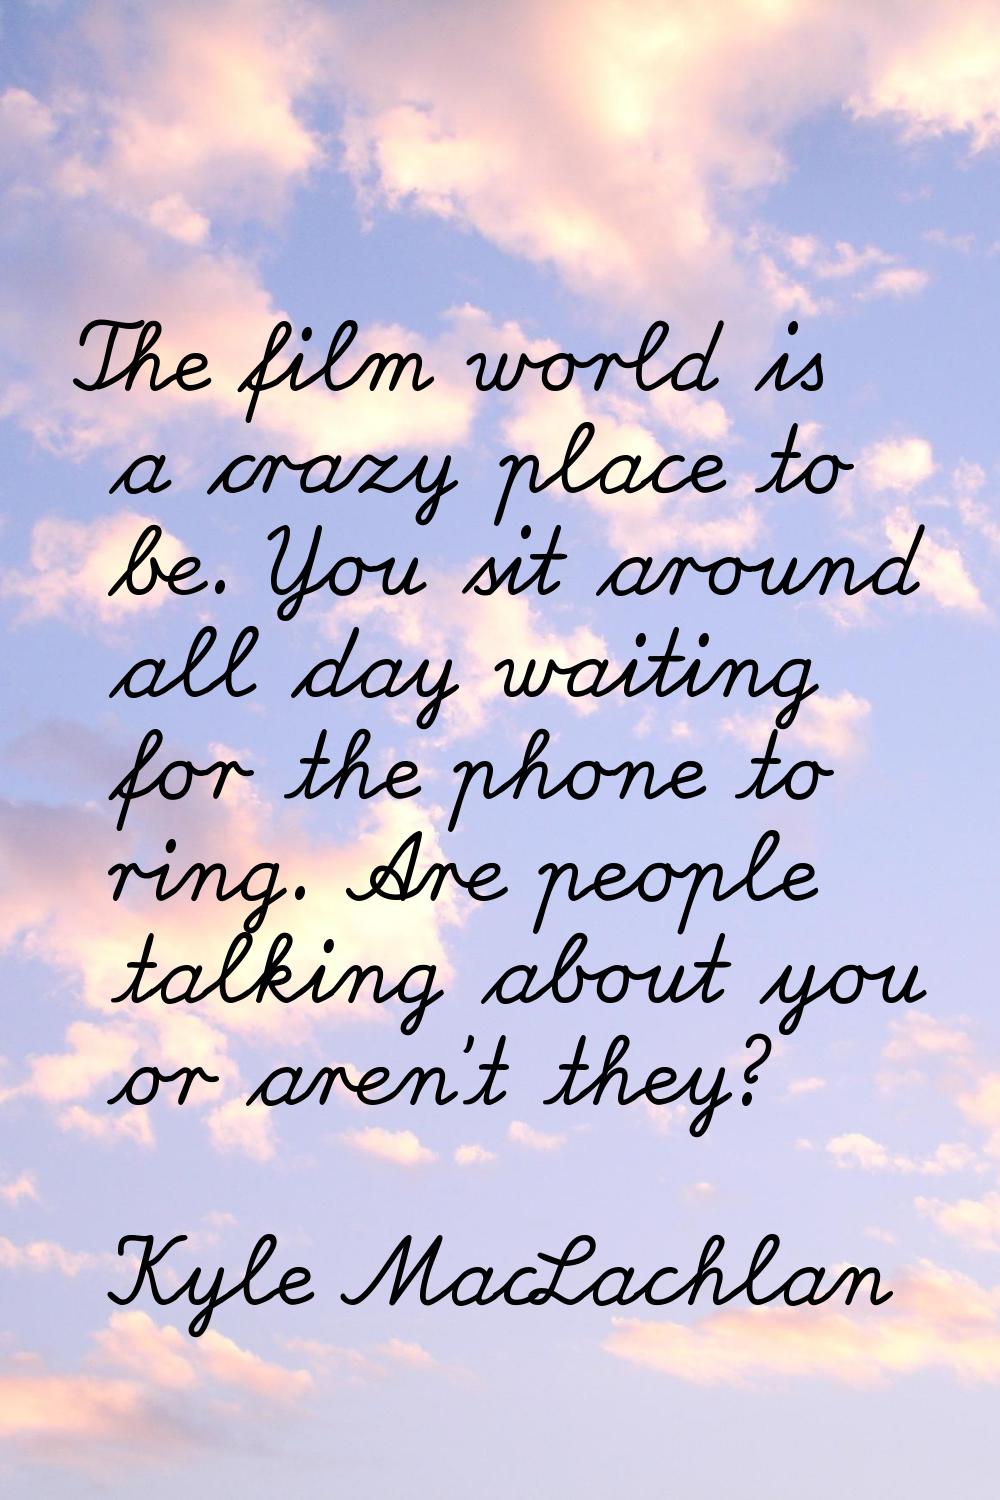 The film world is a crazy place to be. You sit around all day waiting for the phone to ring. Are pe